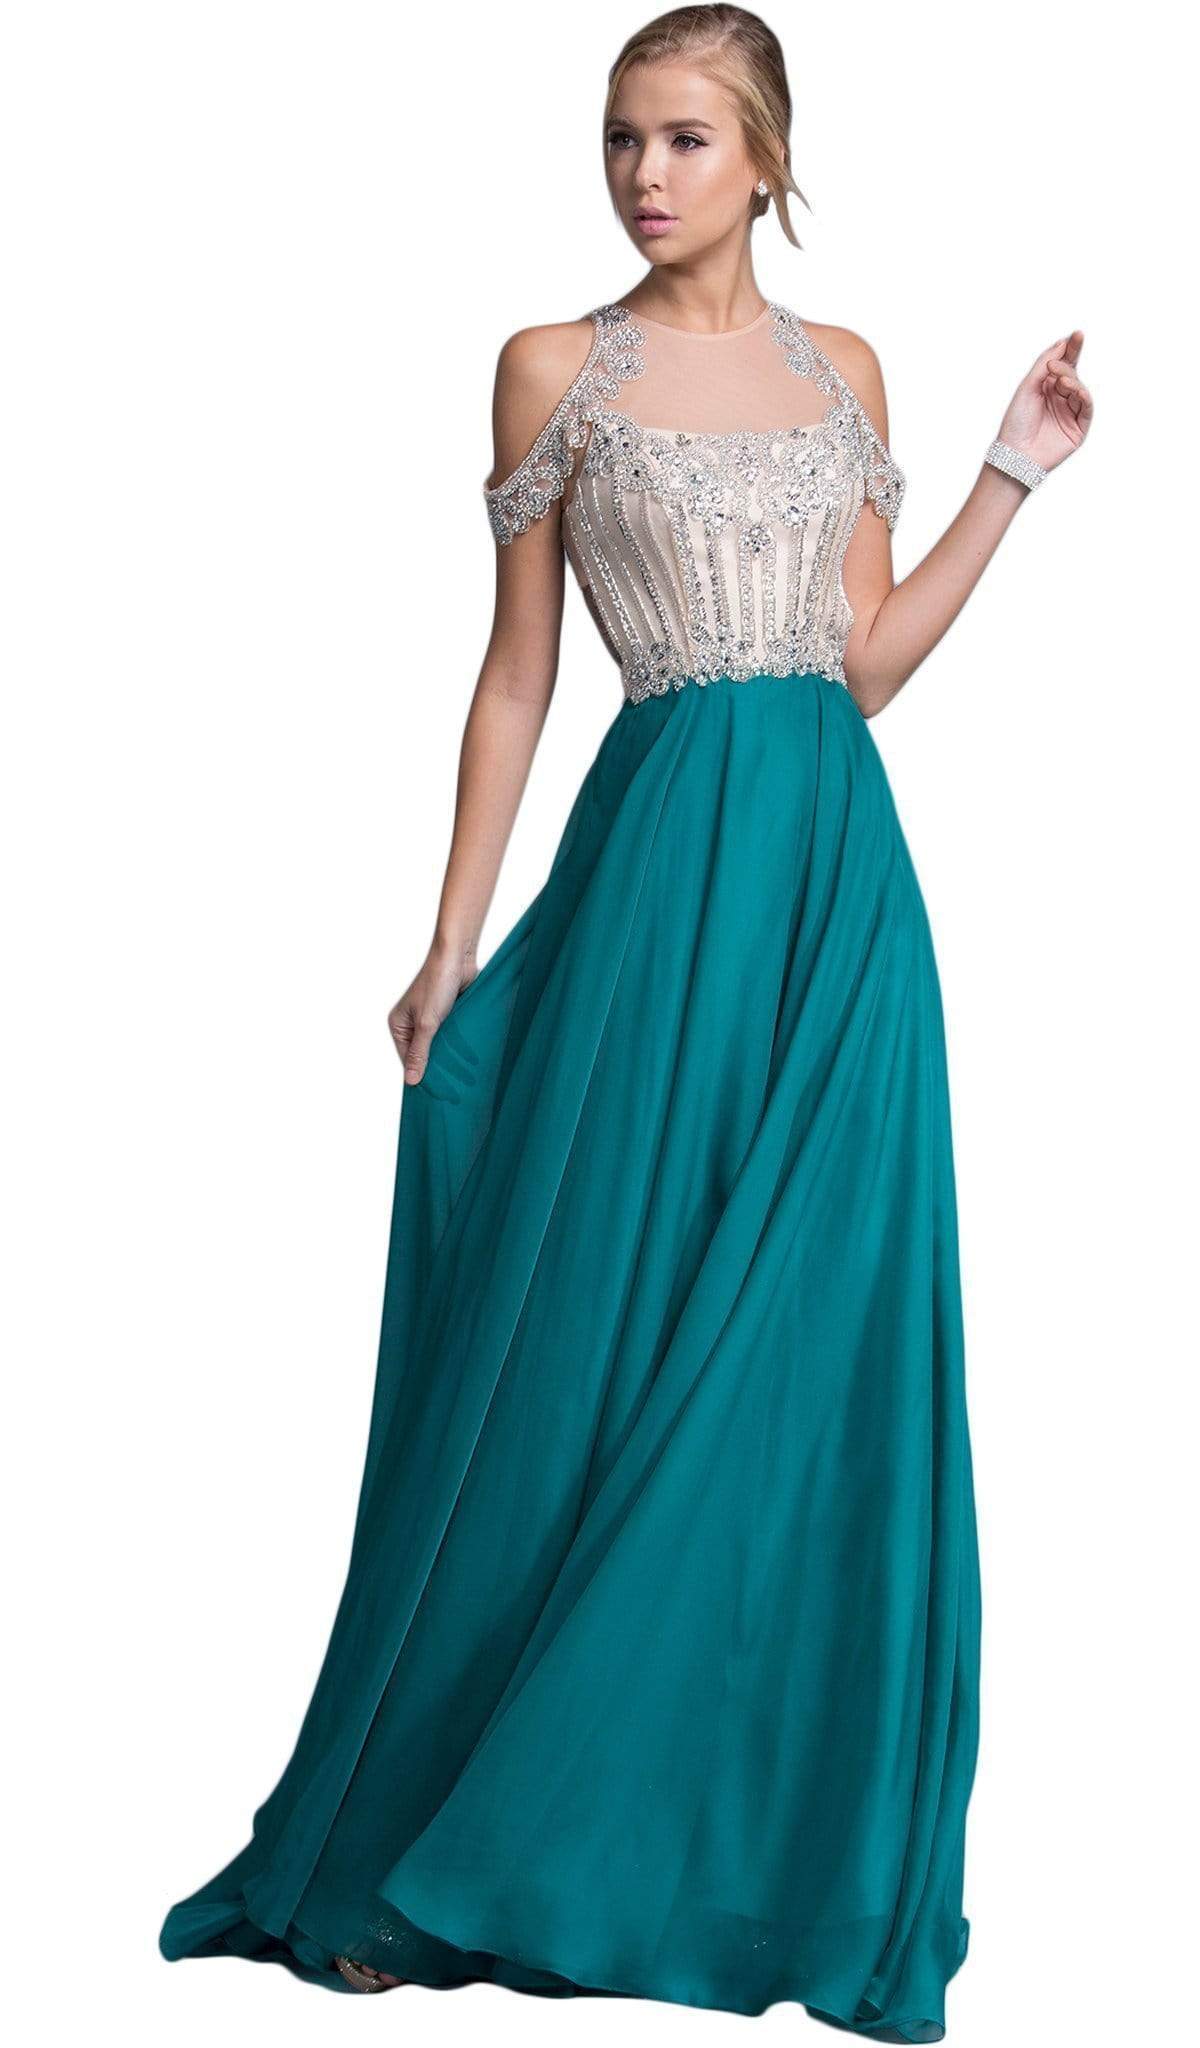 Image of Aspeed Design - Bedazzled Illusion Halter Prom Dress